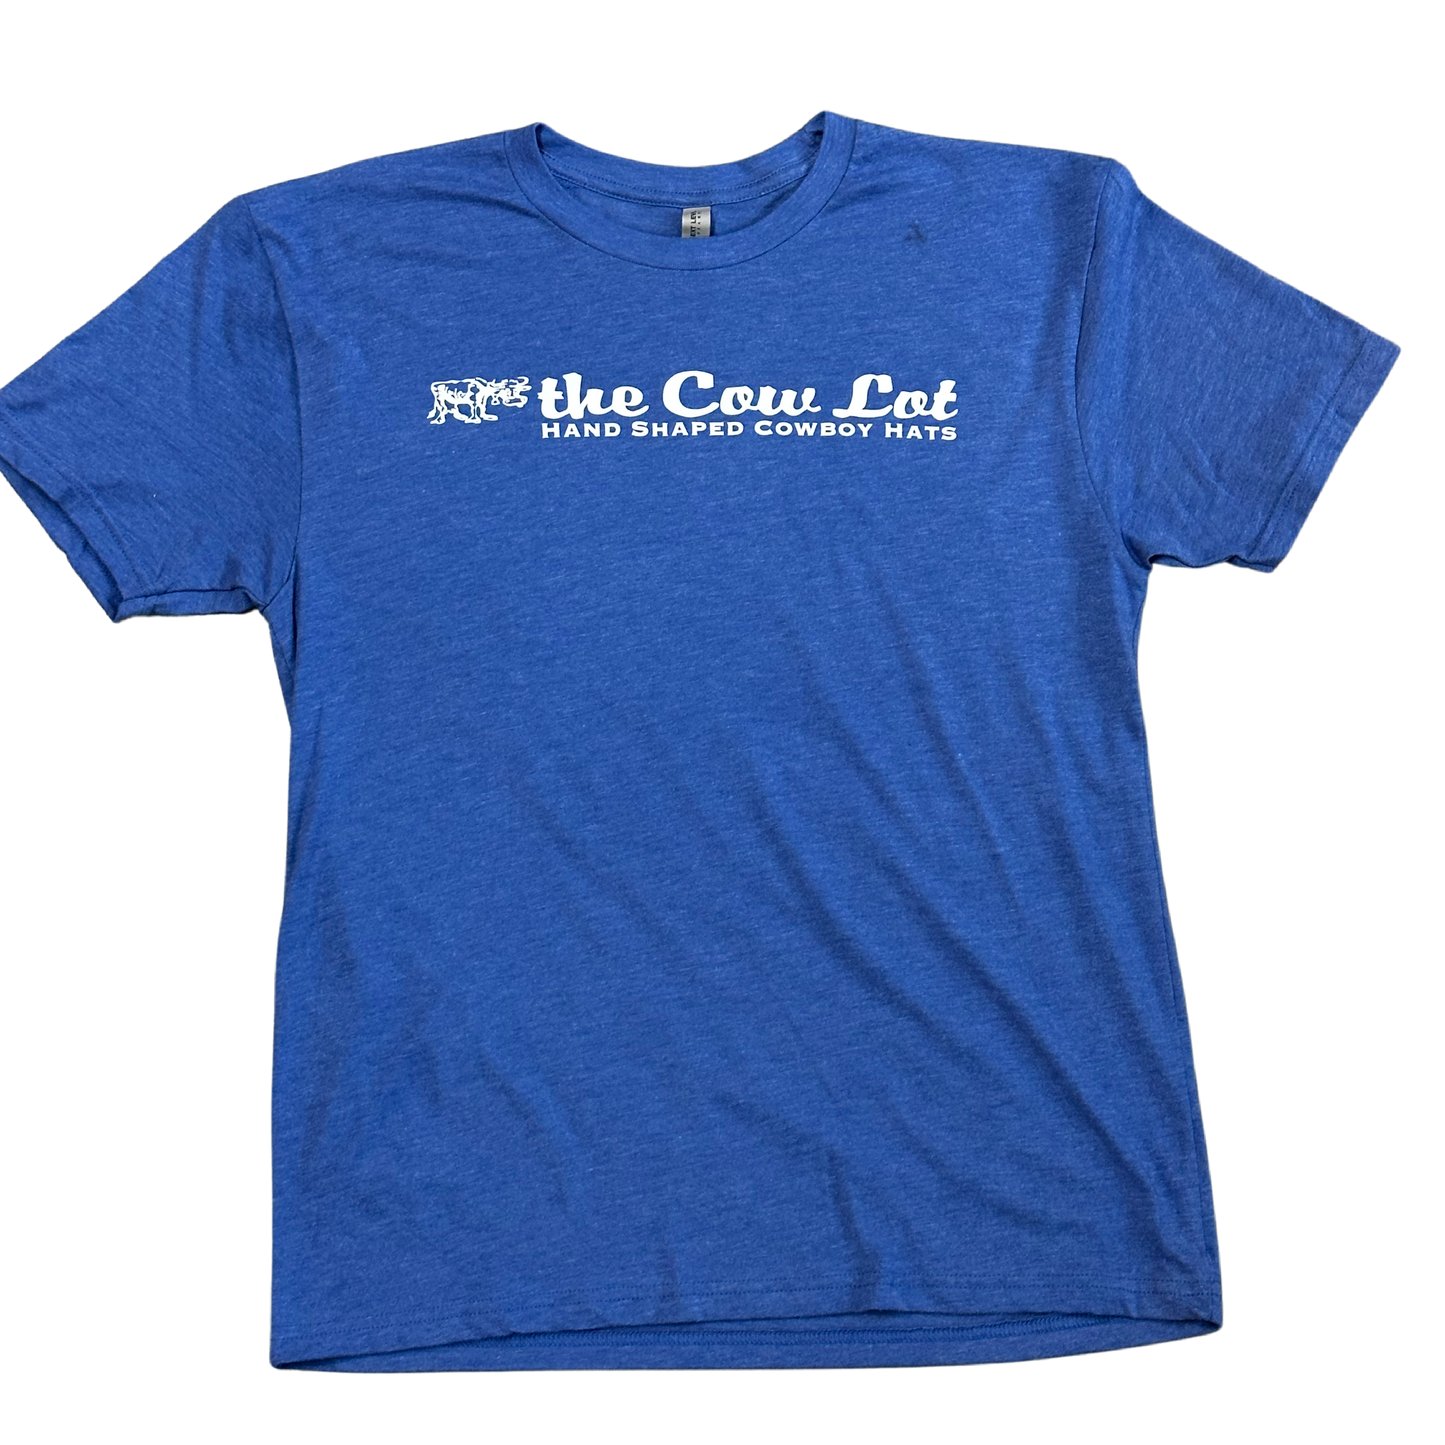 The Cow Lot Tee Shirt Blue